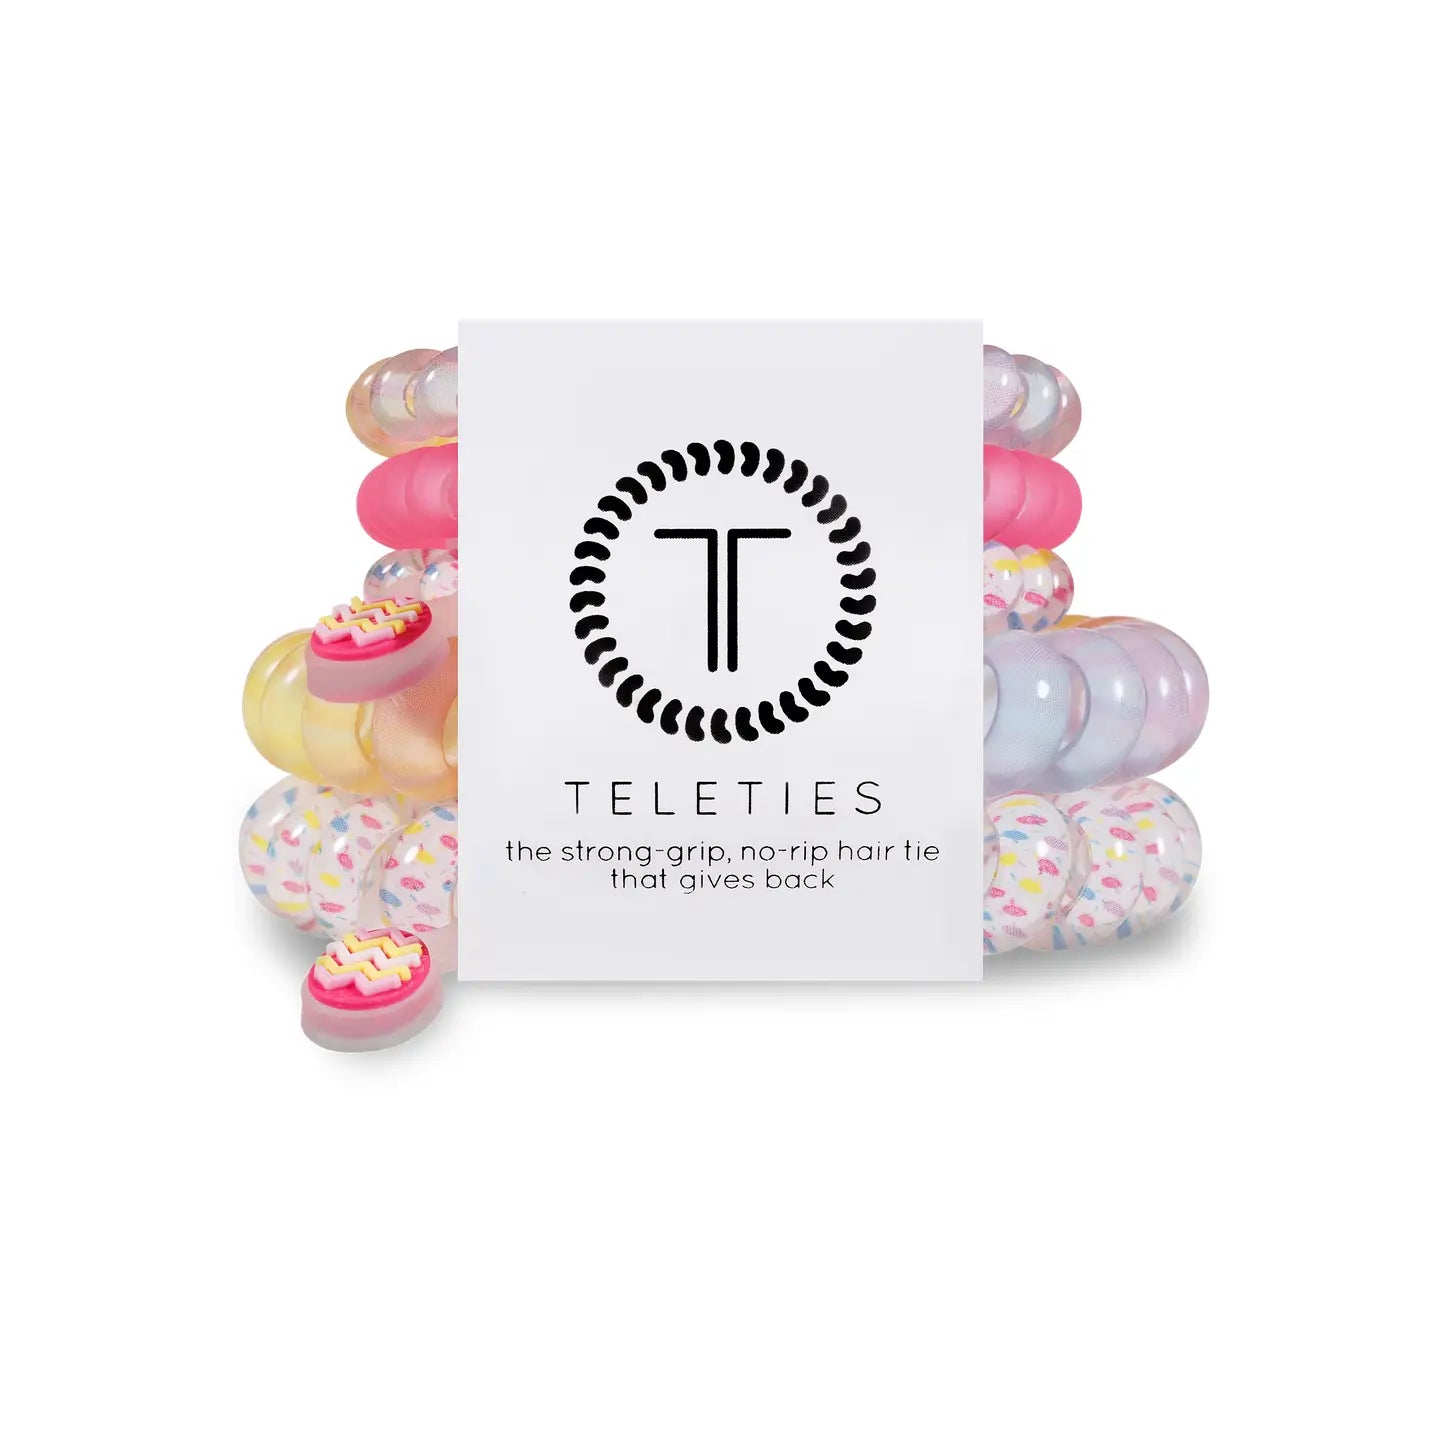 set of 5 teletie hair coils: one small matte pink, one small yellow pastel mixed , one small white with rainbow confetti, one large yellow mixed pastel, and one large white with rainbow confetti